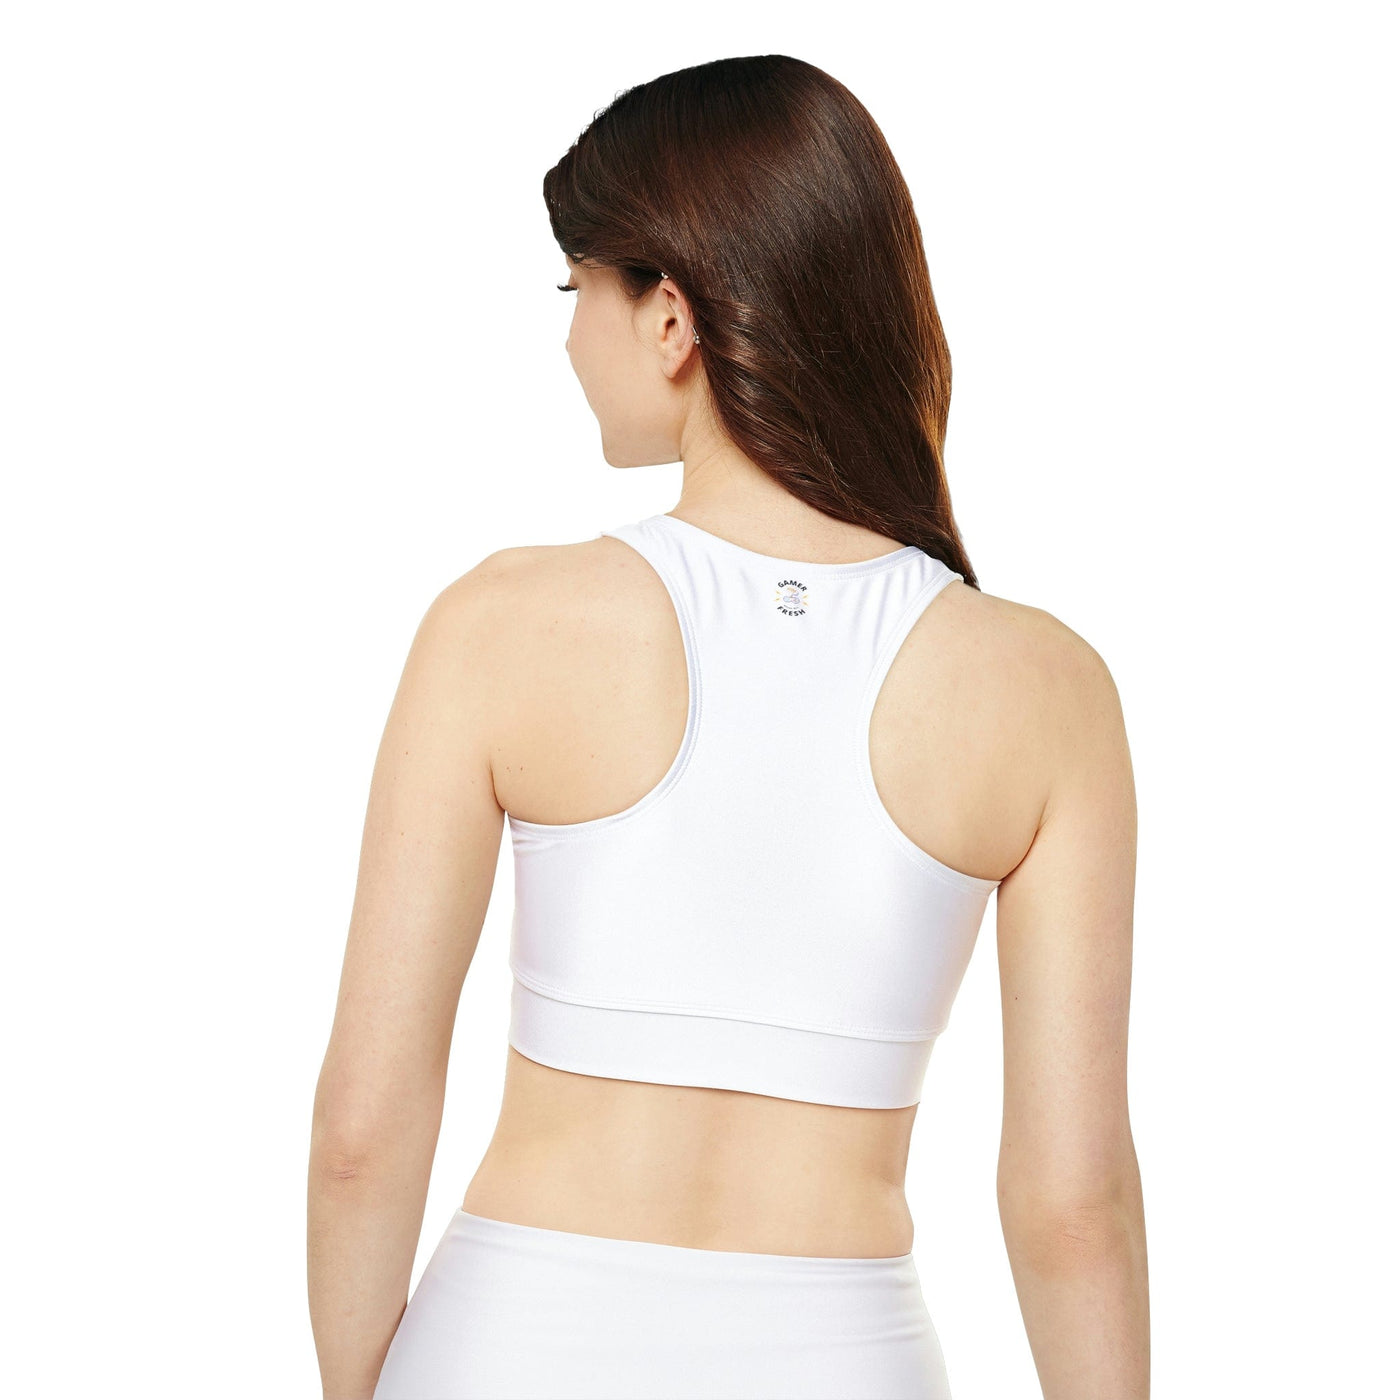 Gamer Fresh Limited Edition Gamer Life Fully Lined Padded Ladies Sports Bra | White